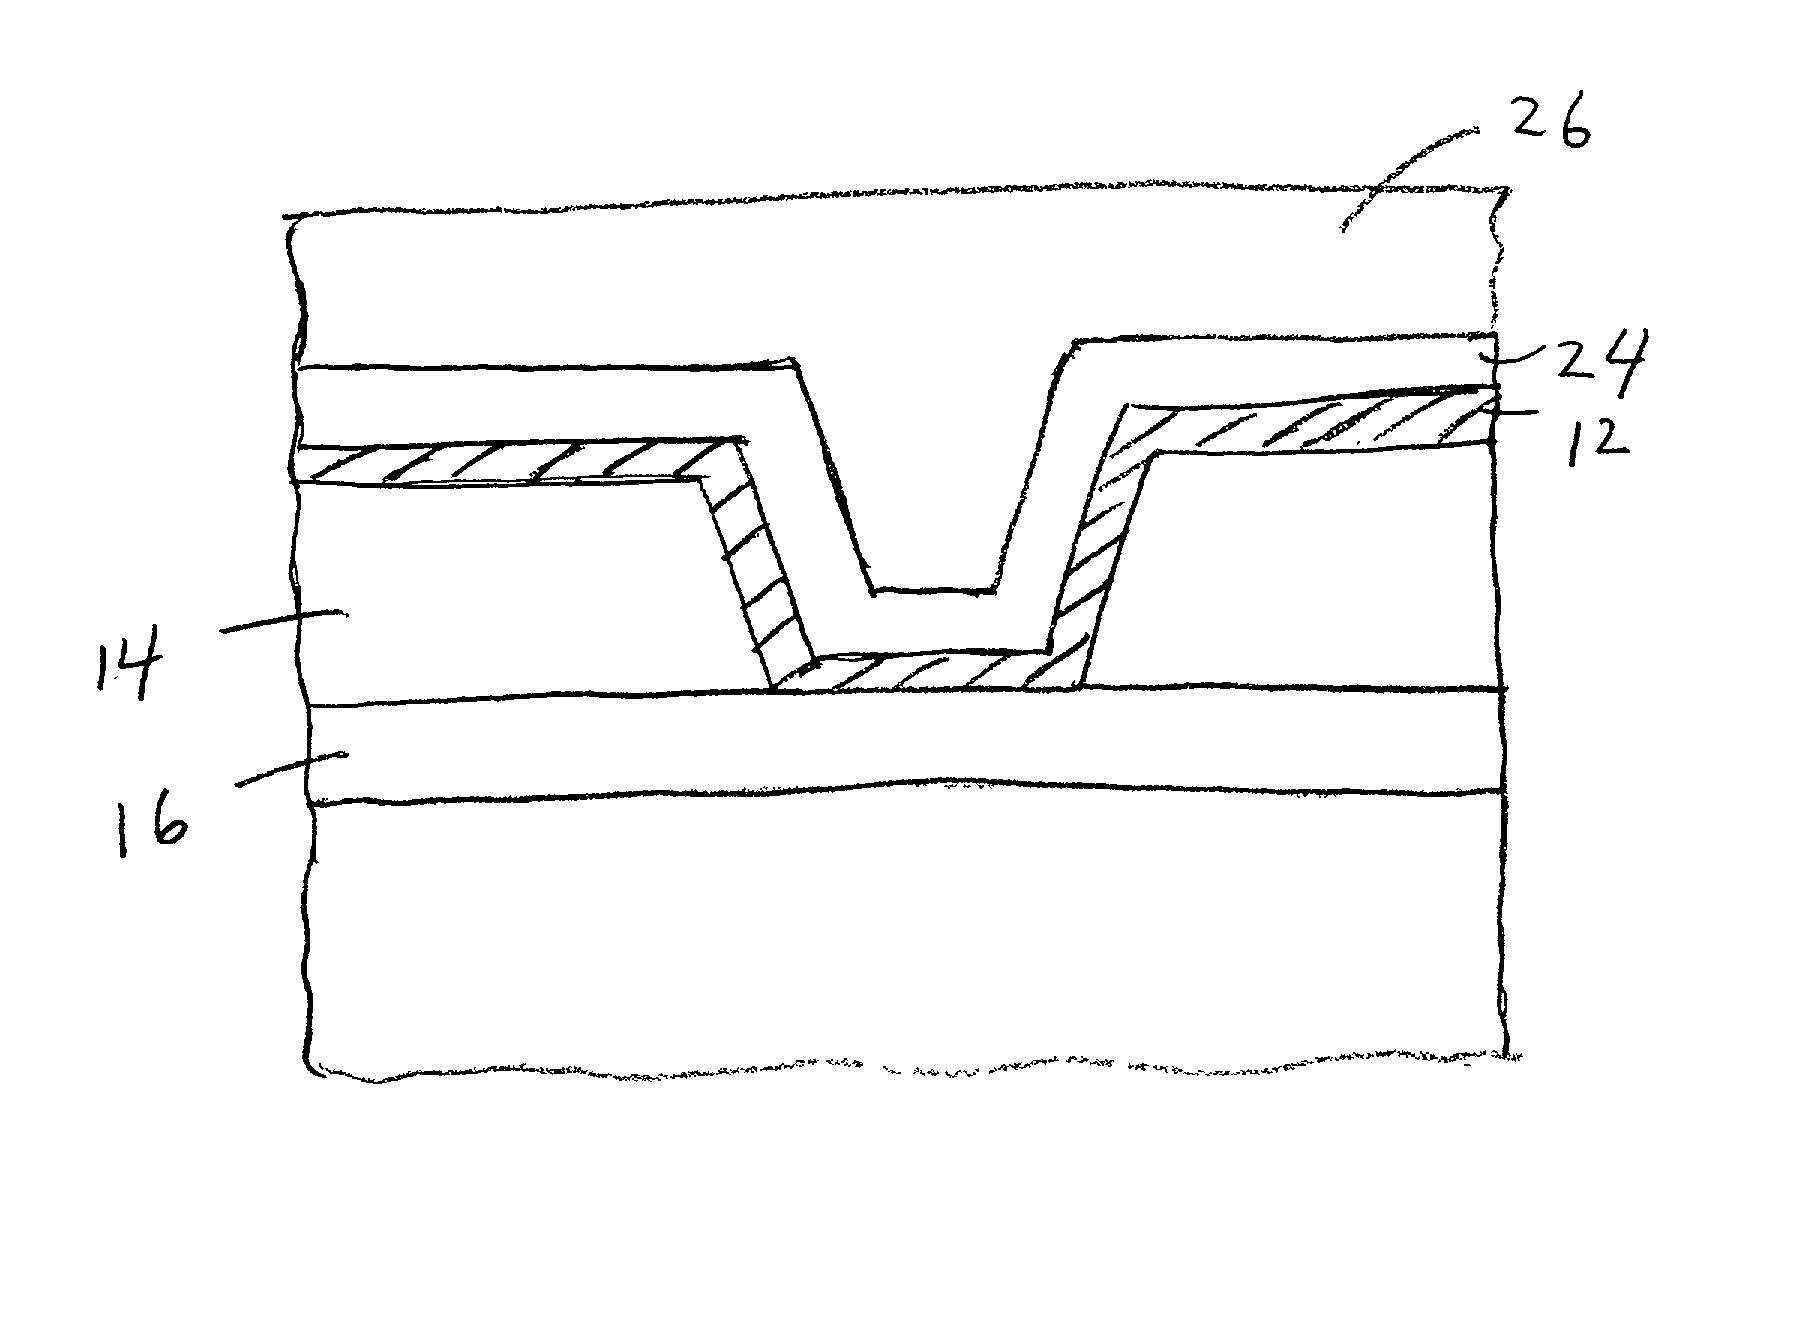 High throughput process for the formation of a refractory metal nucleation layer